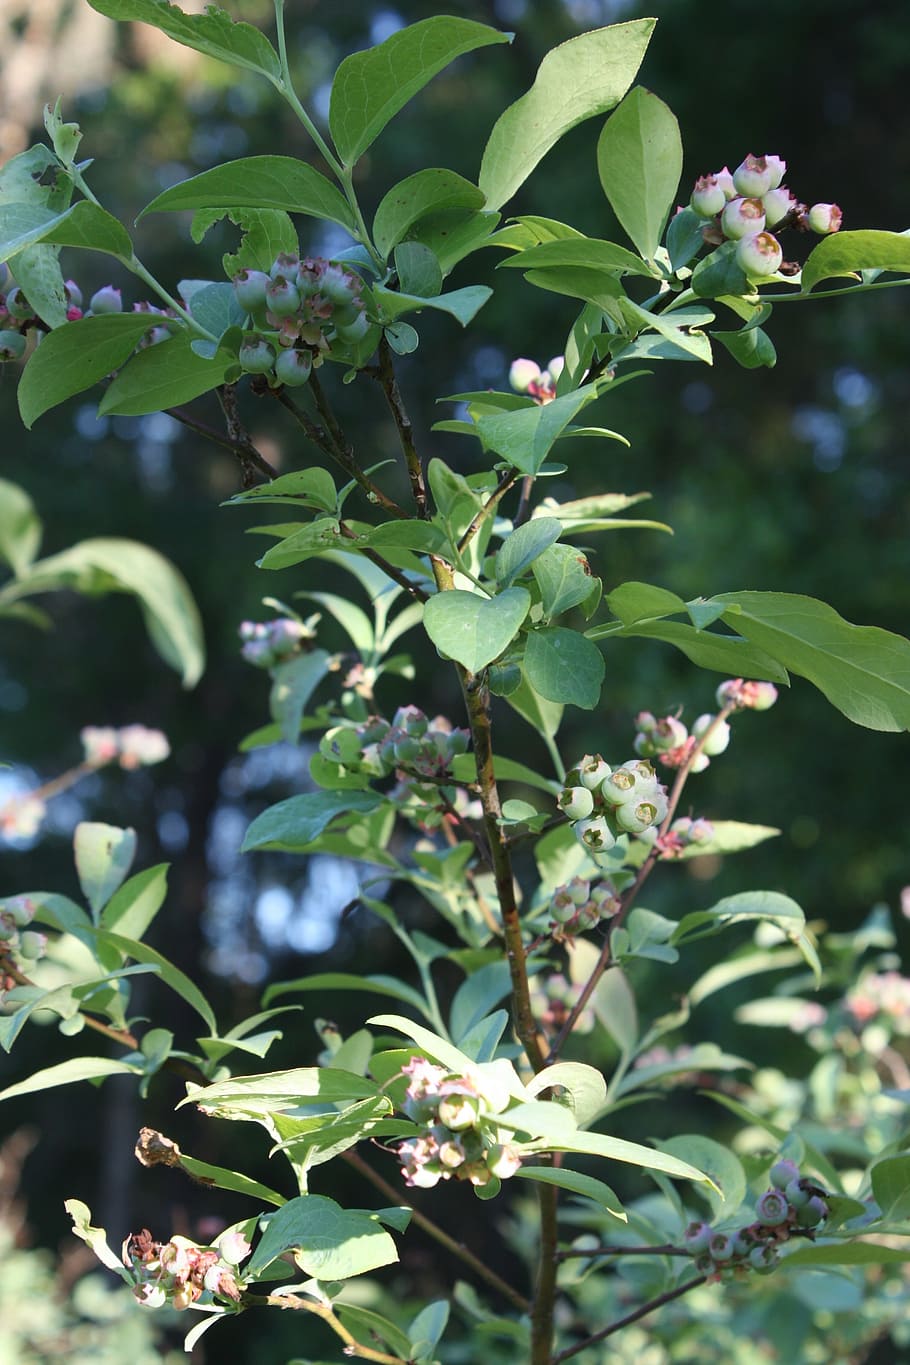 turning, blueberries, green blueberries, blueberry bush, growth, plant, leaf, plant part, beauty in nature, green color